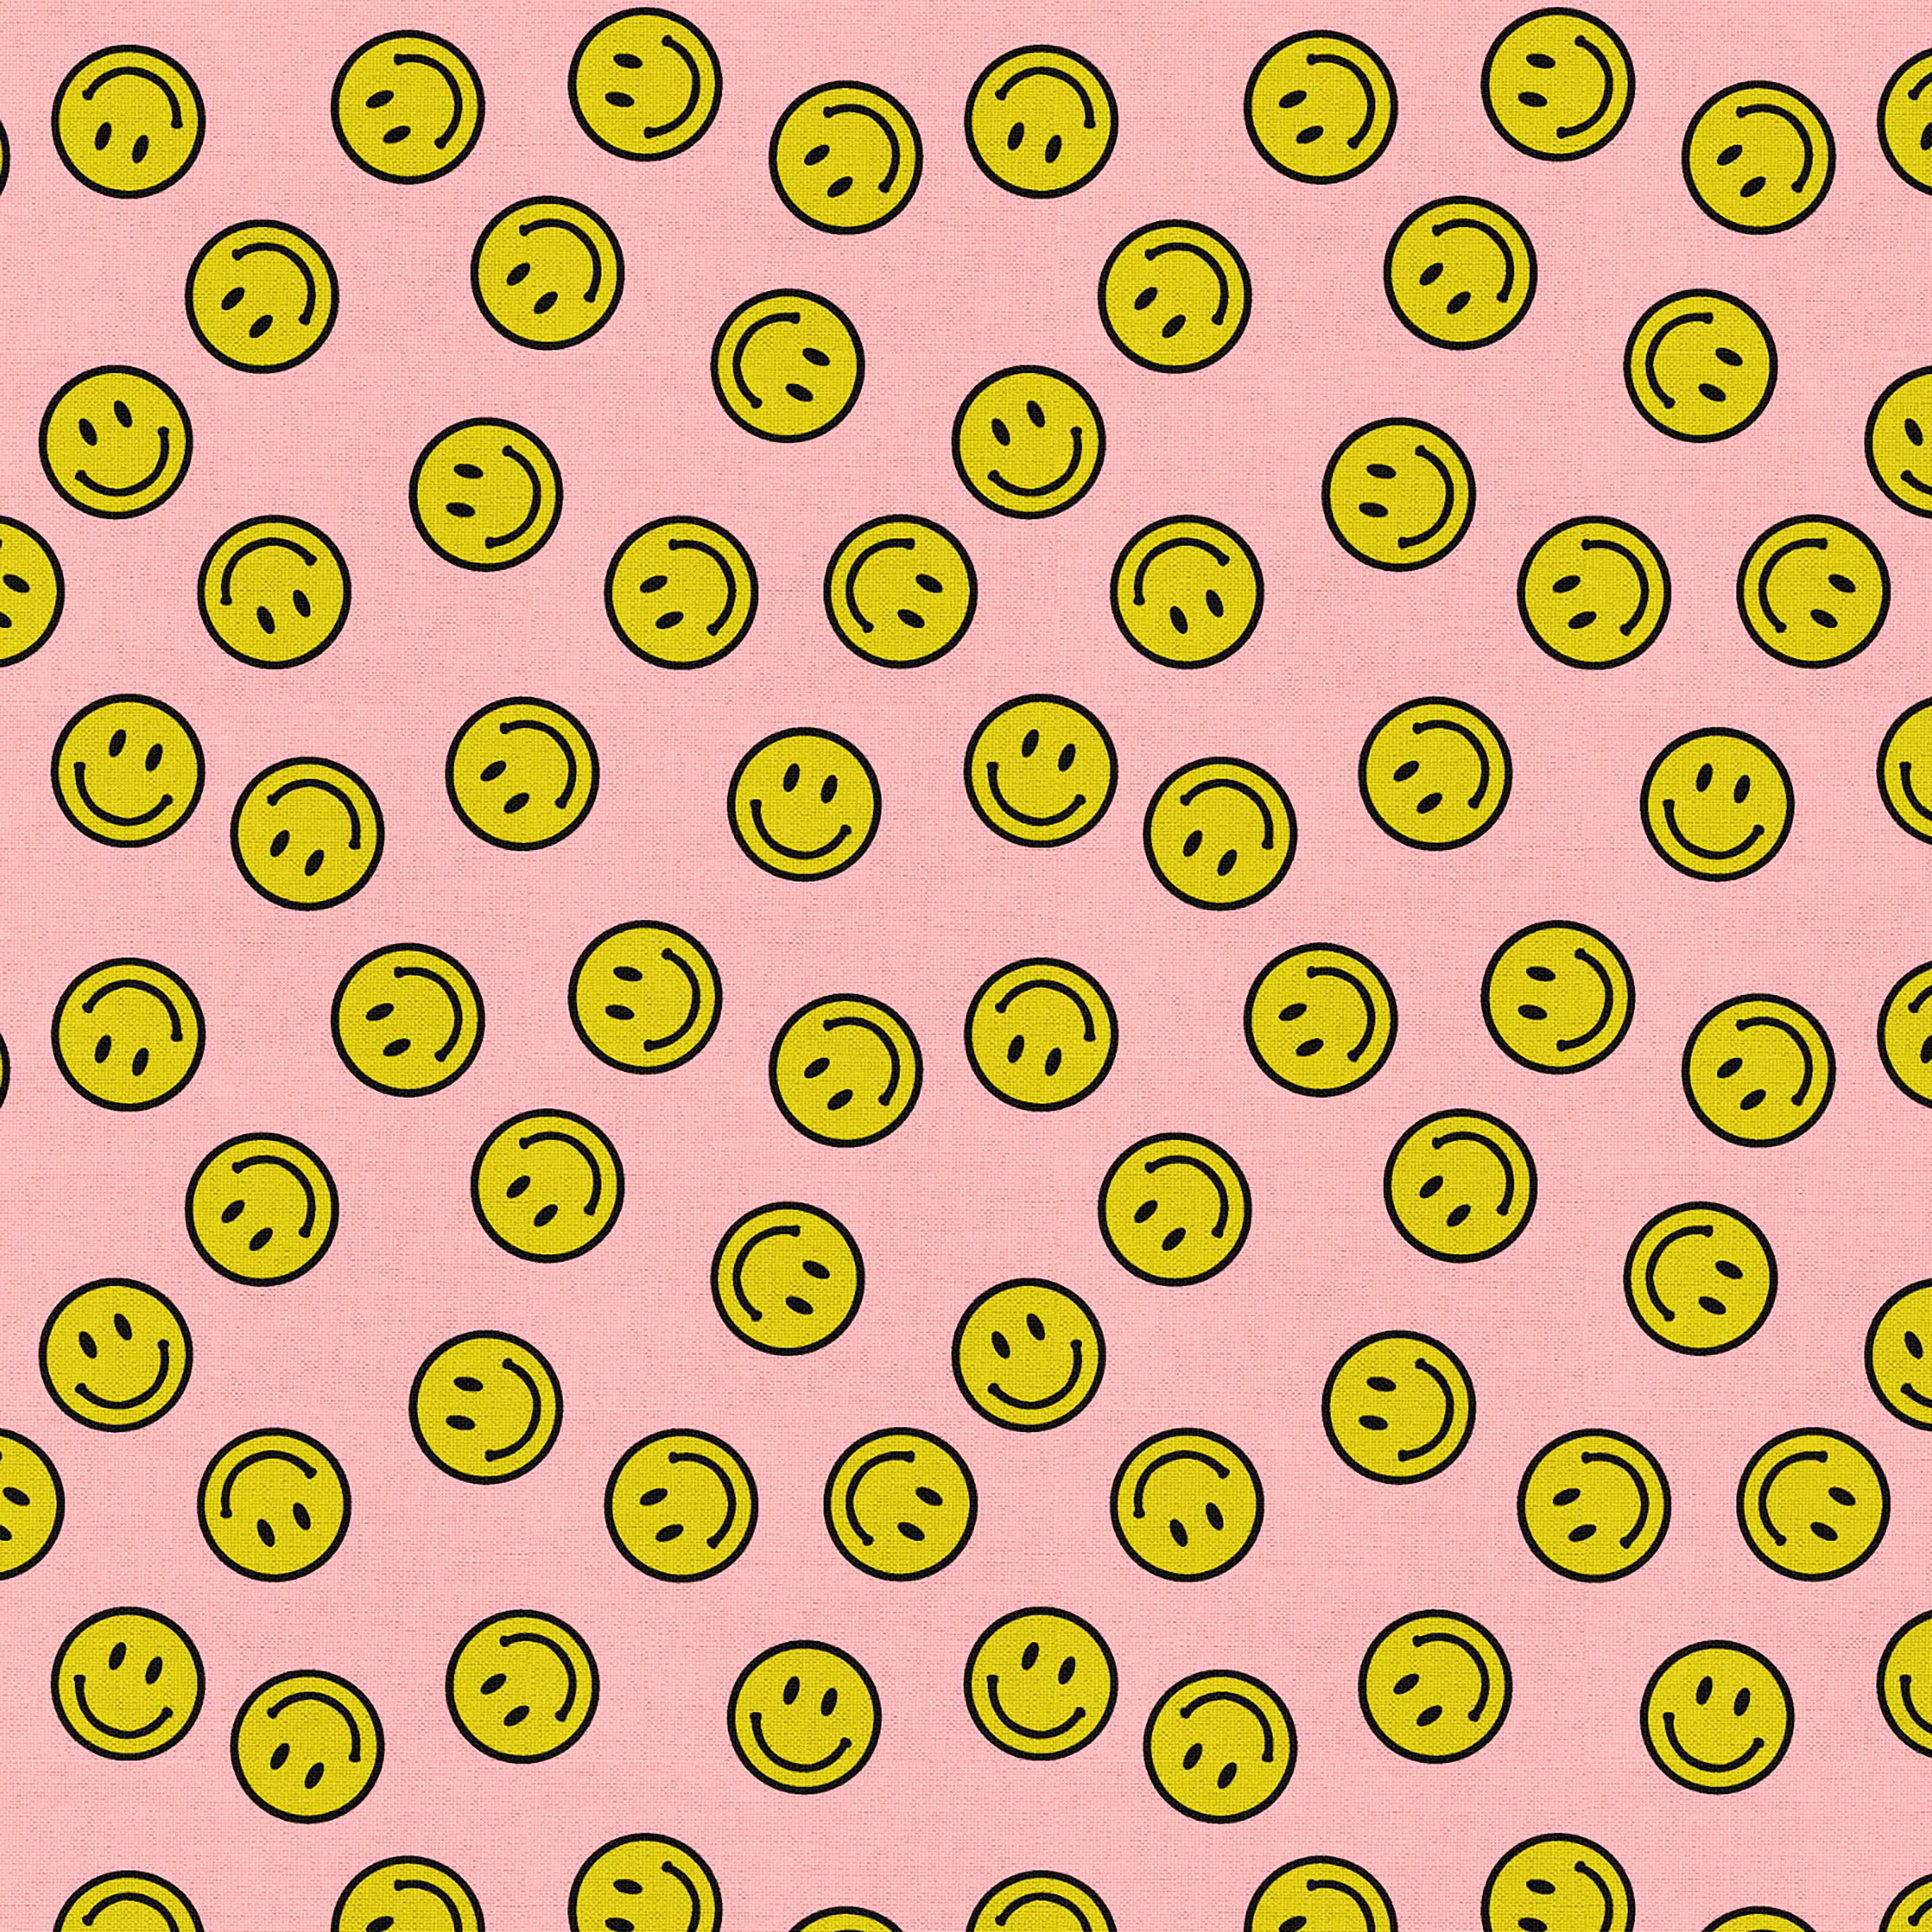 Fabric Editions Smile on Pink Cotton Fabric